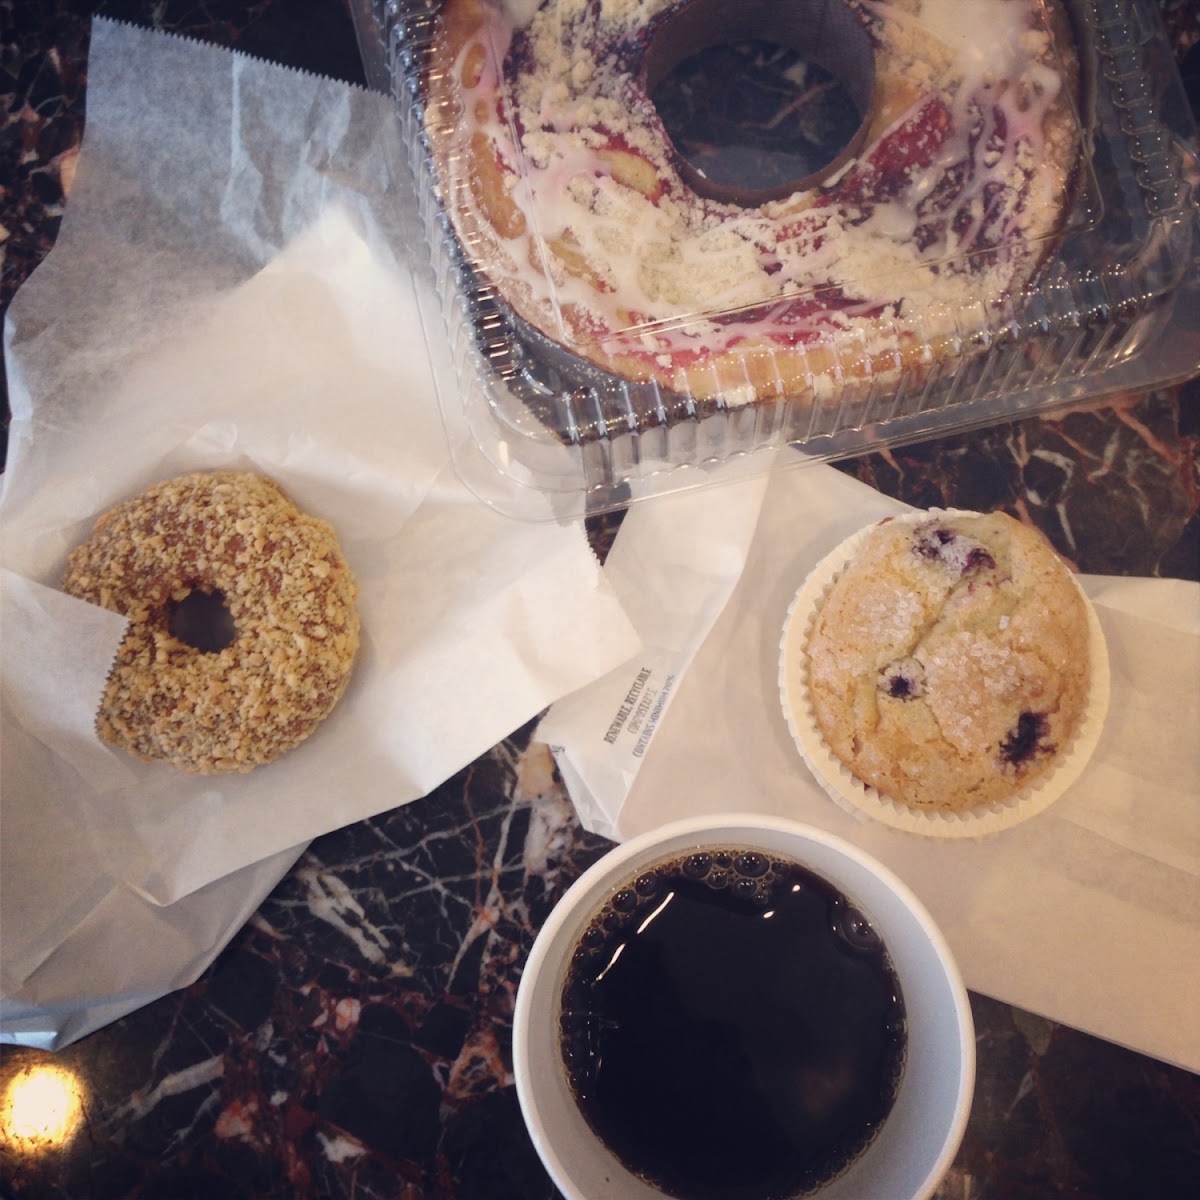 All gluten free baked goodies!  Peanut covered donut, blueberry muffin, and a raspberry ring cake!  